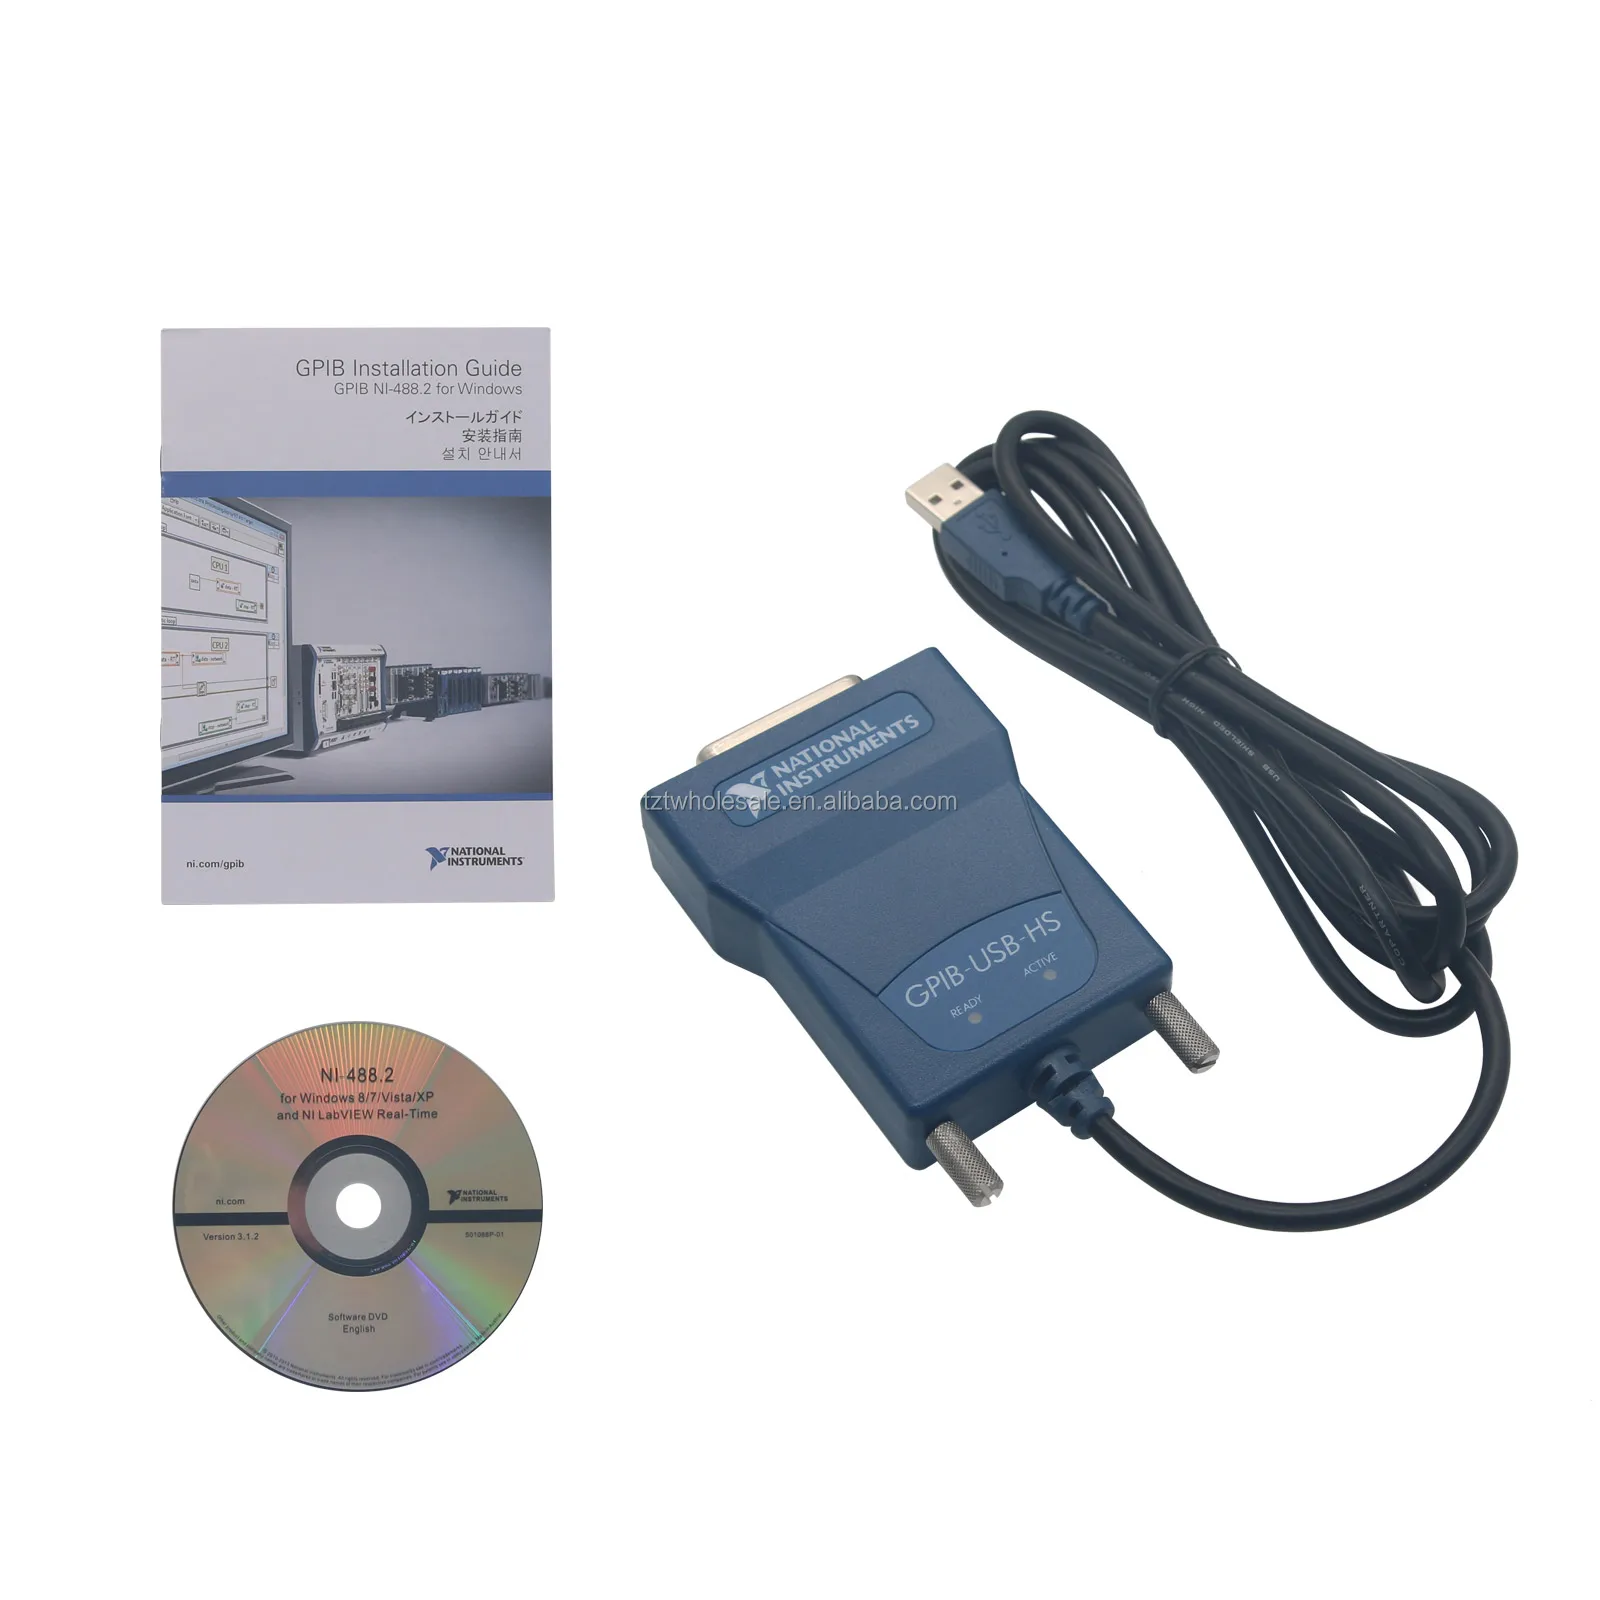 GPIB-USB-HS Interface Adapter controller IEEE 488.2 NI Brand New In Box 